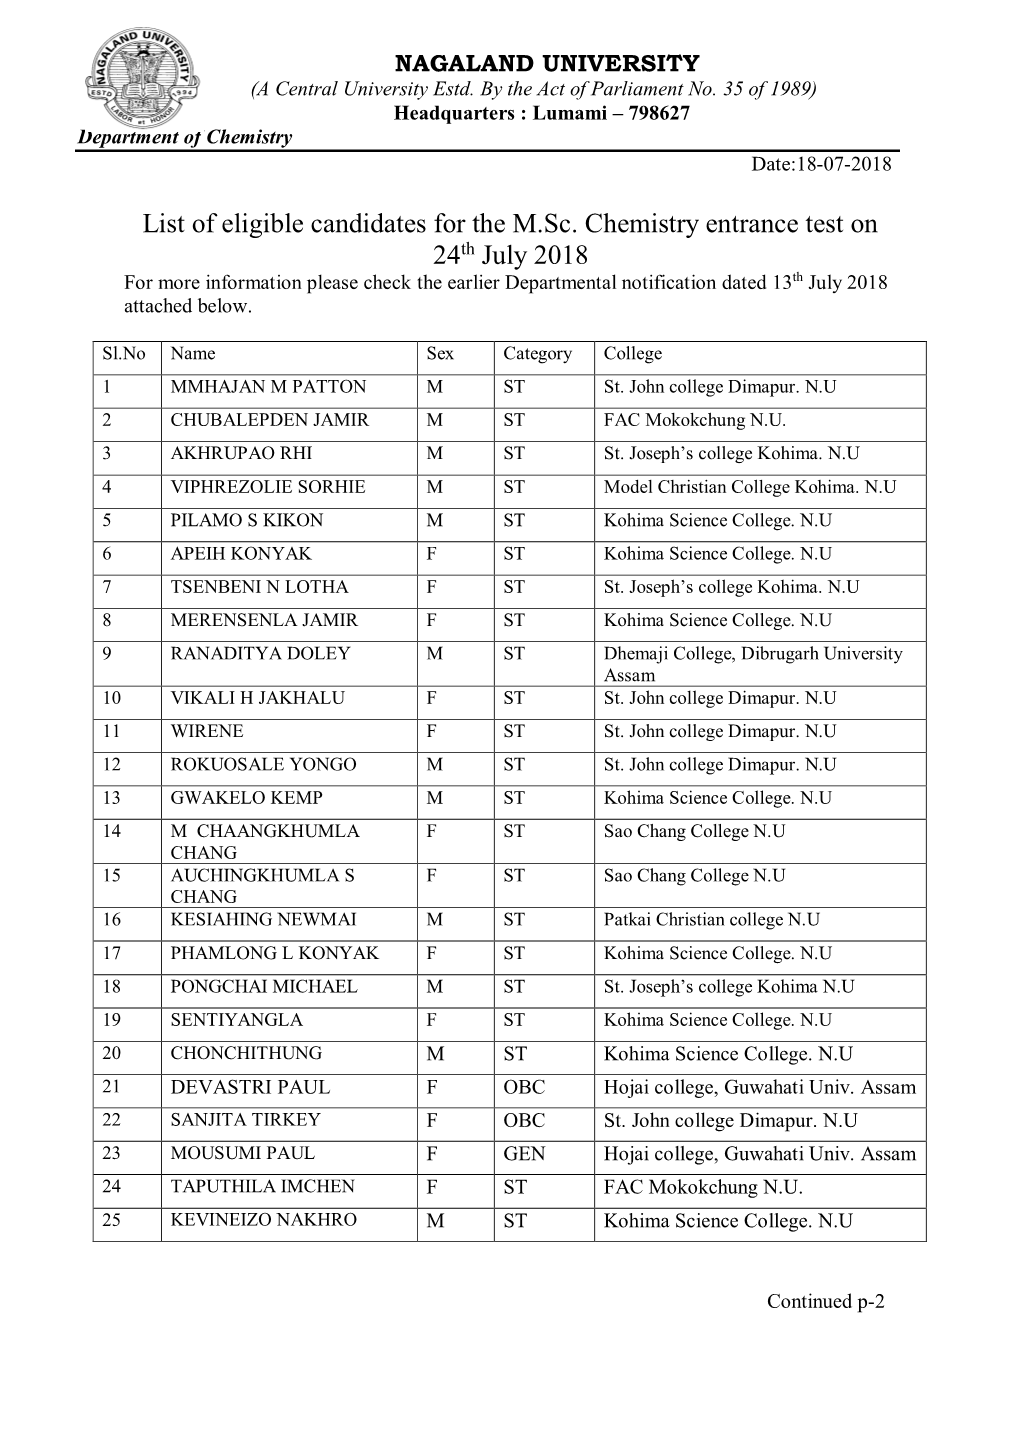 List of Eligible Candidates for the M.Sc. Chemistry Entrance Test On